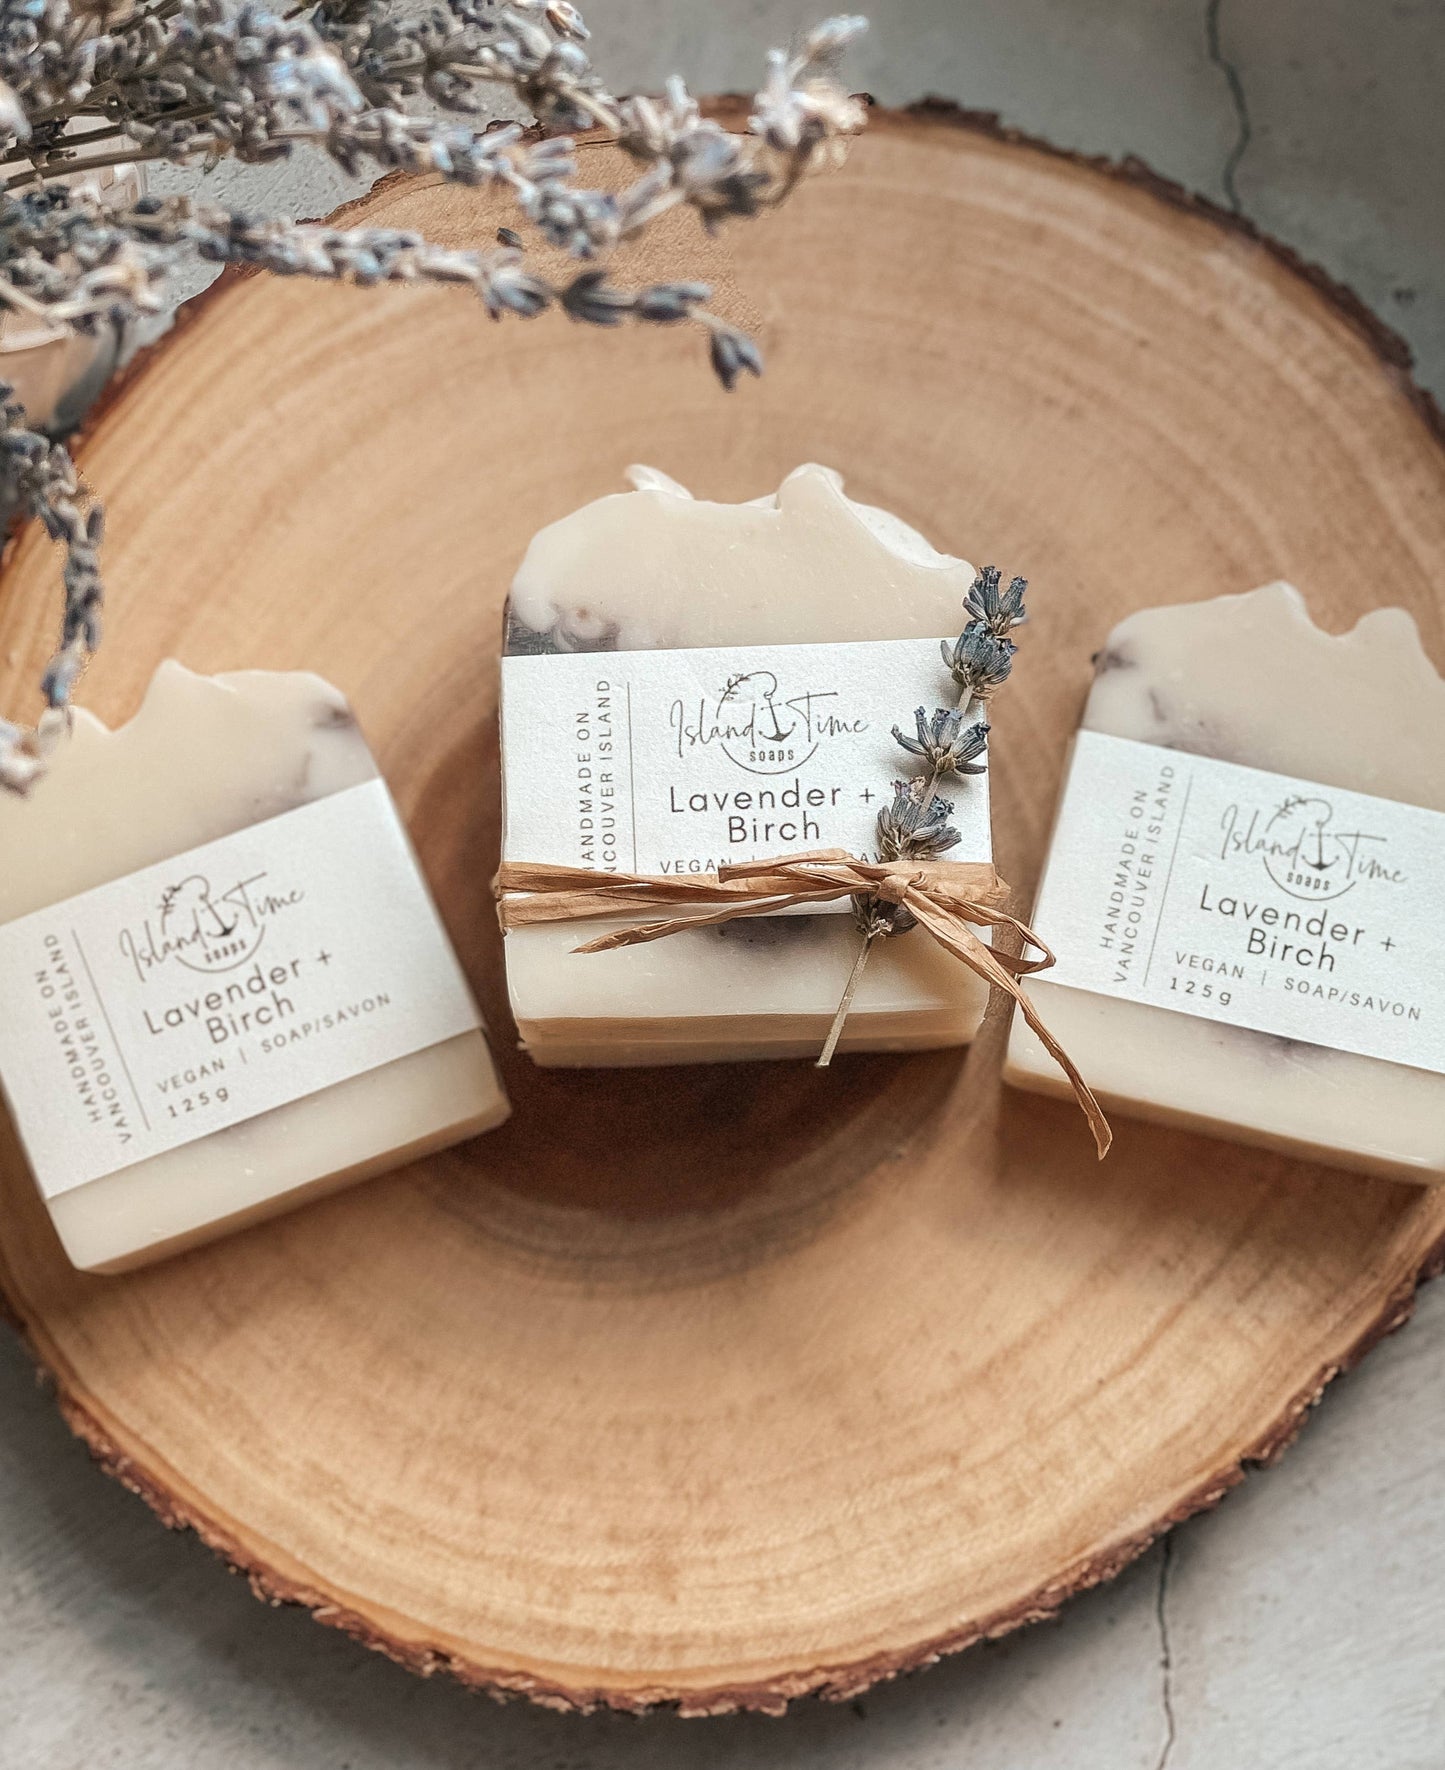 Island Time Soap + Candle - All Natural Lavender + Birch Handmade Artisan Soap